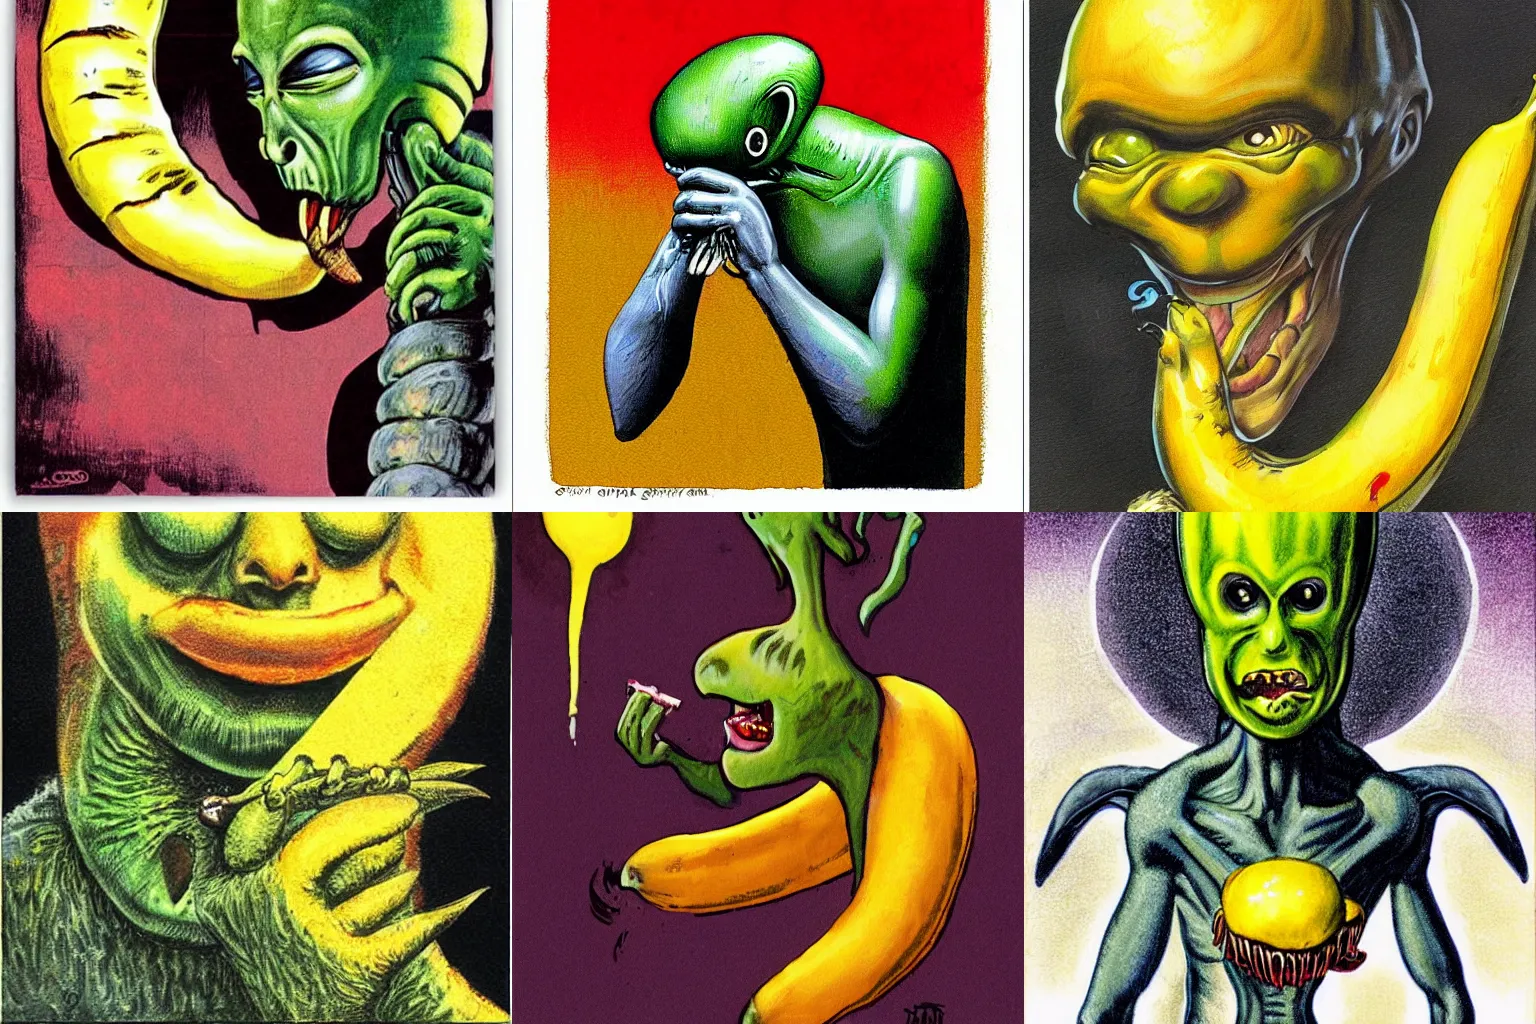 Prompt: illustration of strieber grey alien eating a banana by Basil Gogos